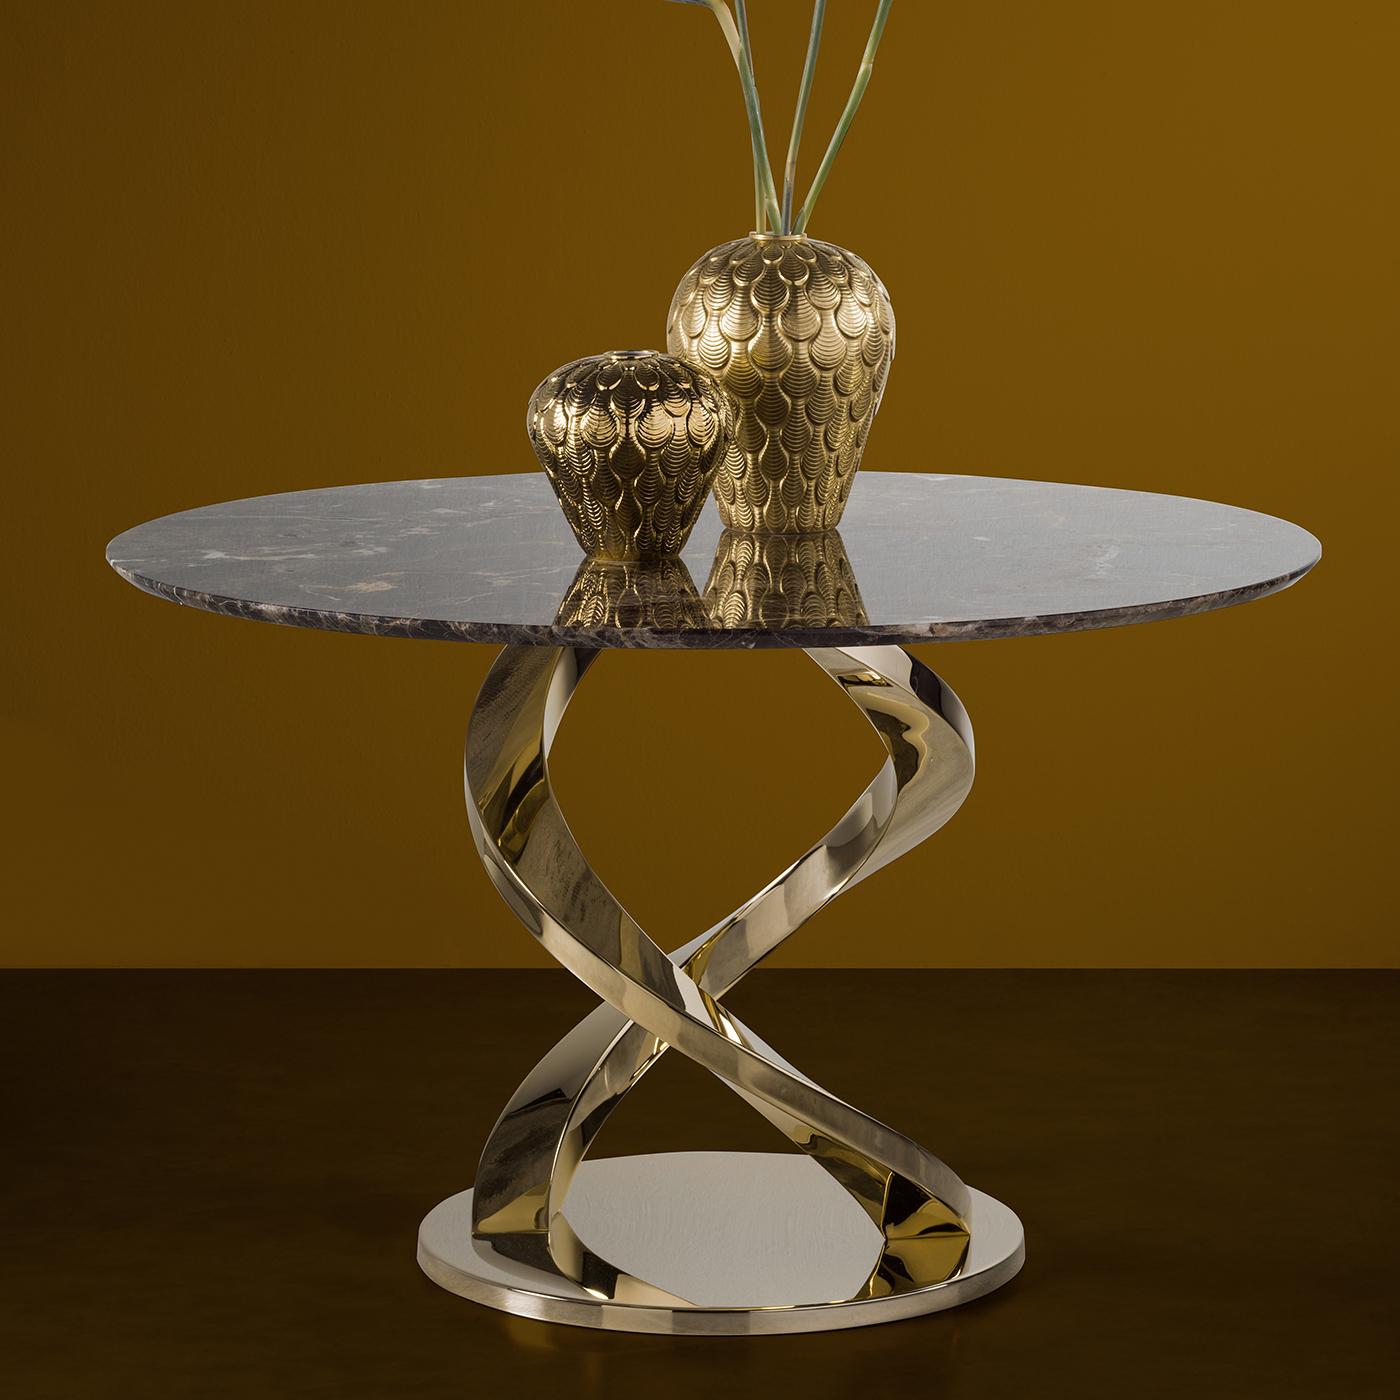 Part of the Home Couture collection, this side table is a modern reinterpretation of bold and sensual Art Deco furniture. Its marble top serves a stately display for lamps or collectibles, while the base, with its 24-karat gold-plated stainless